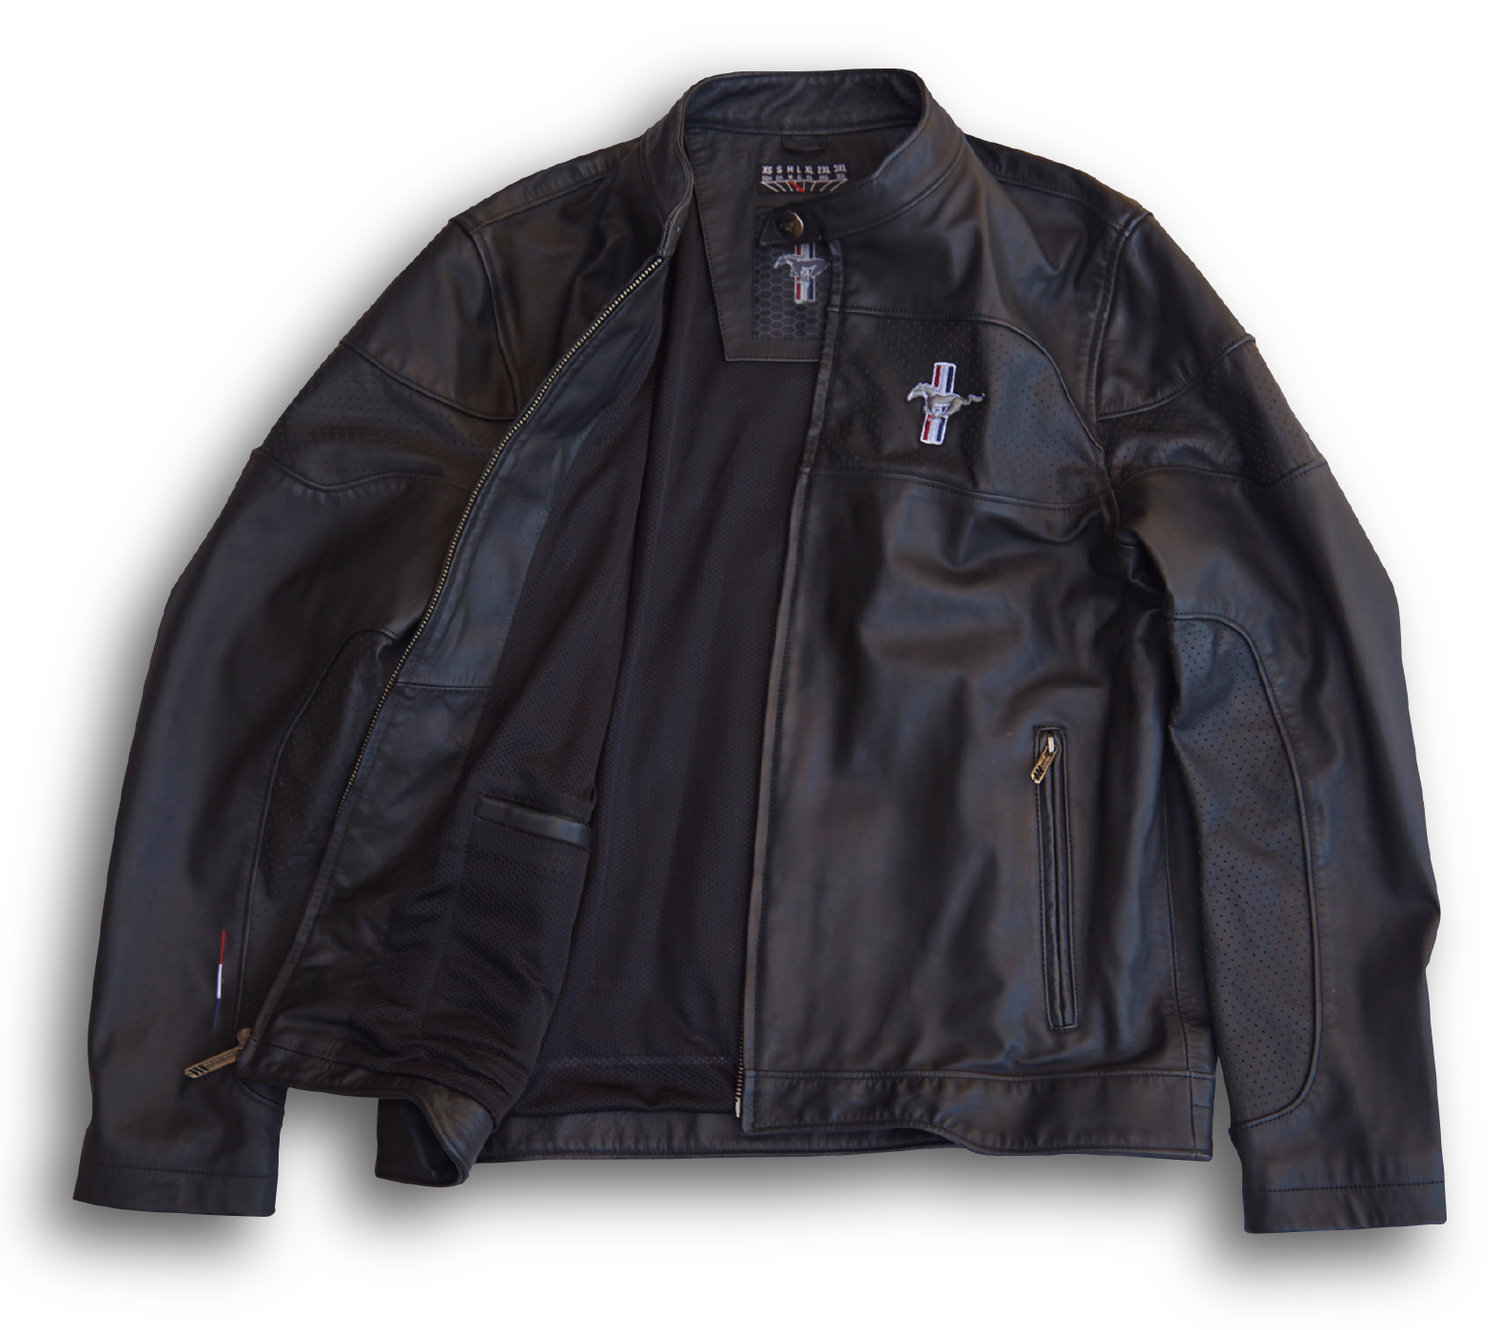 GT — Ford Mustang Jackets